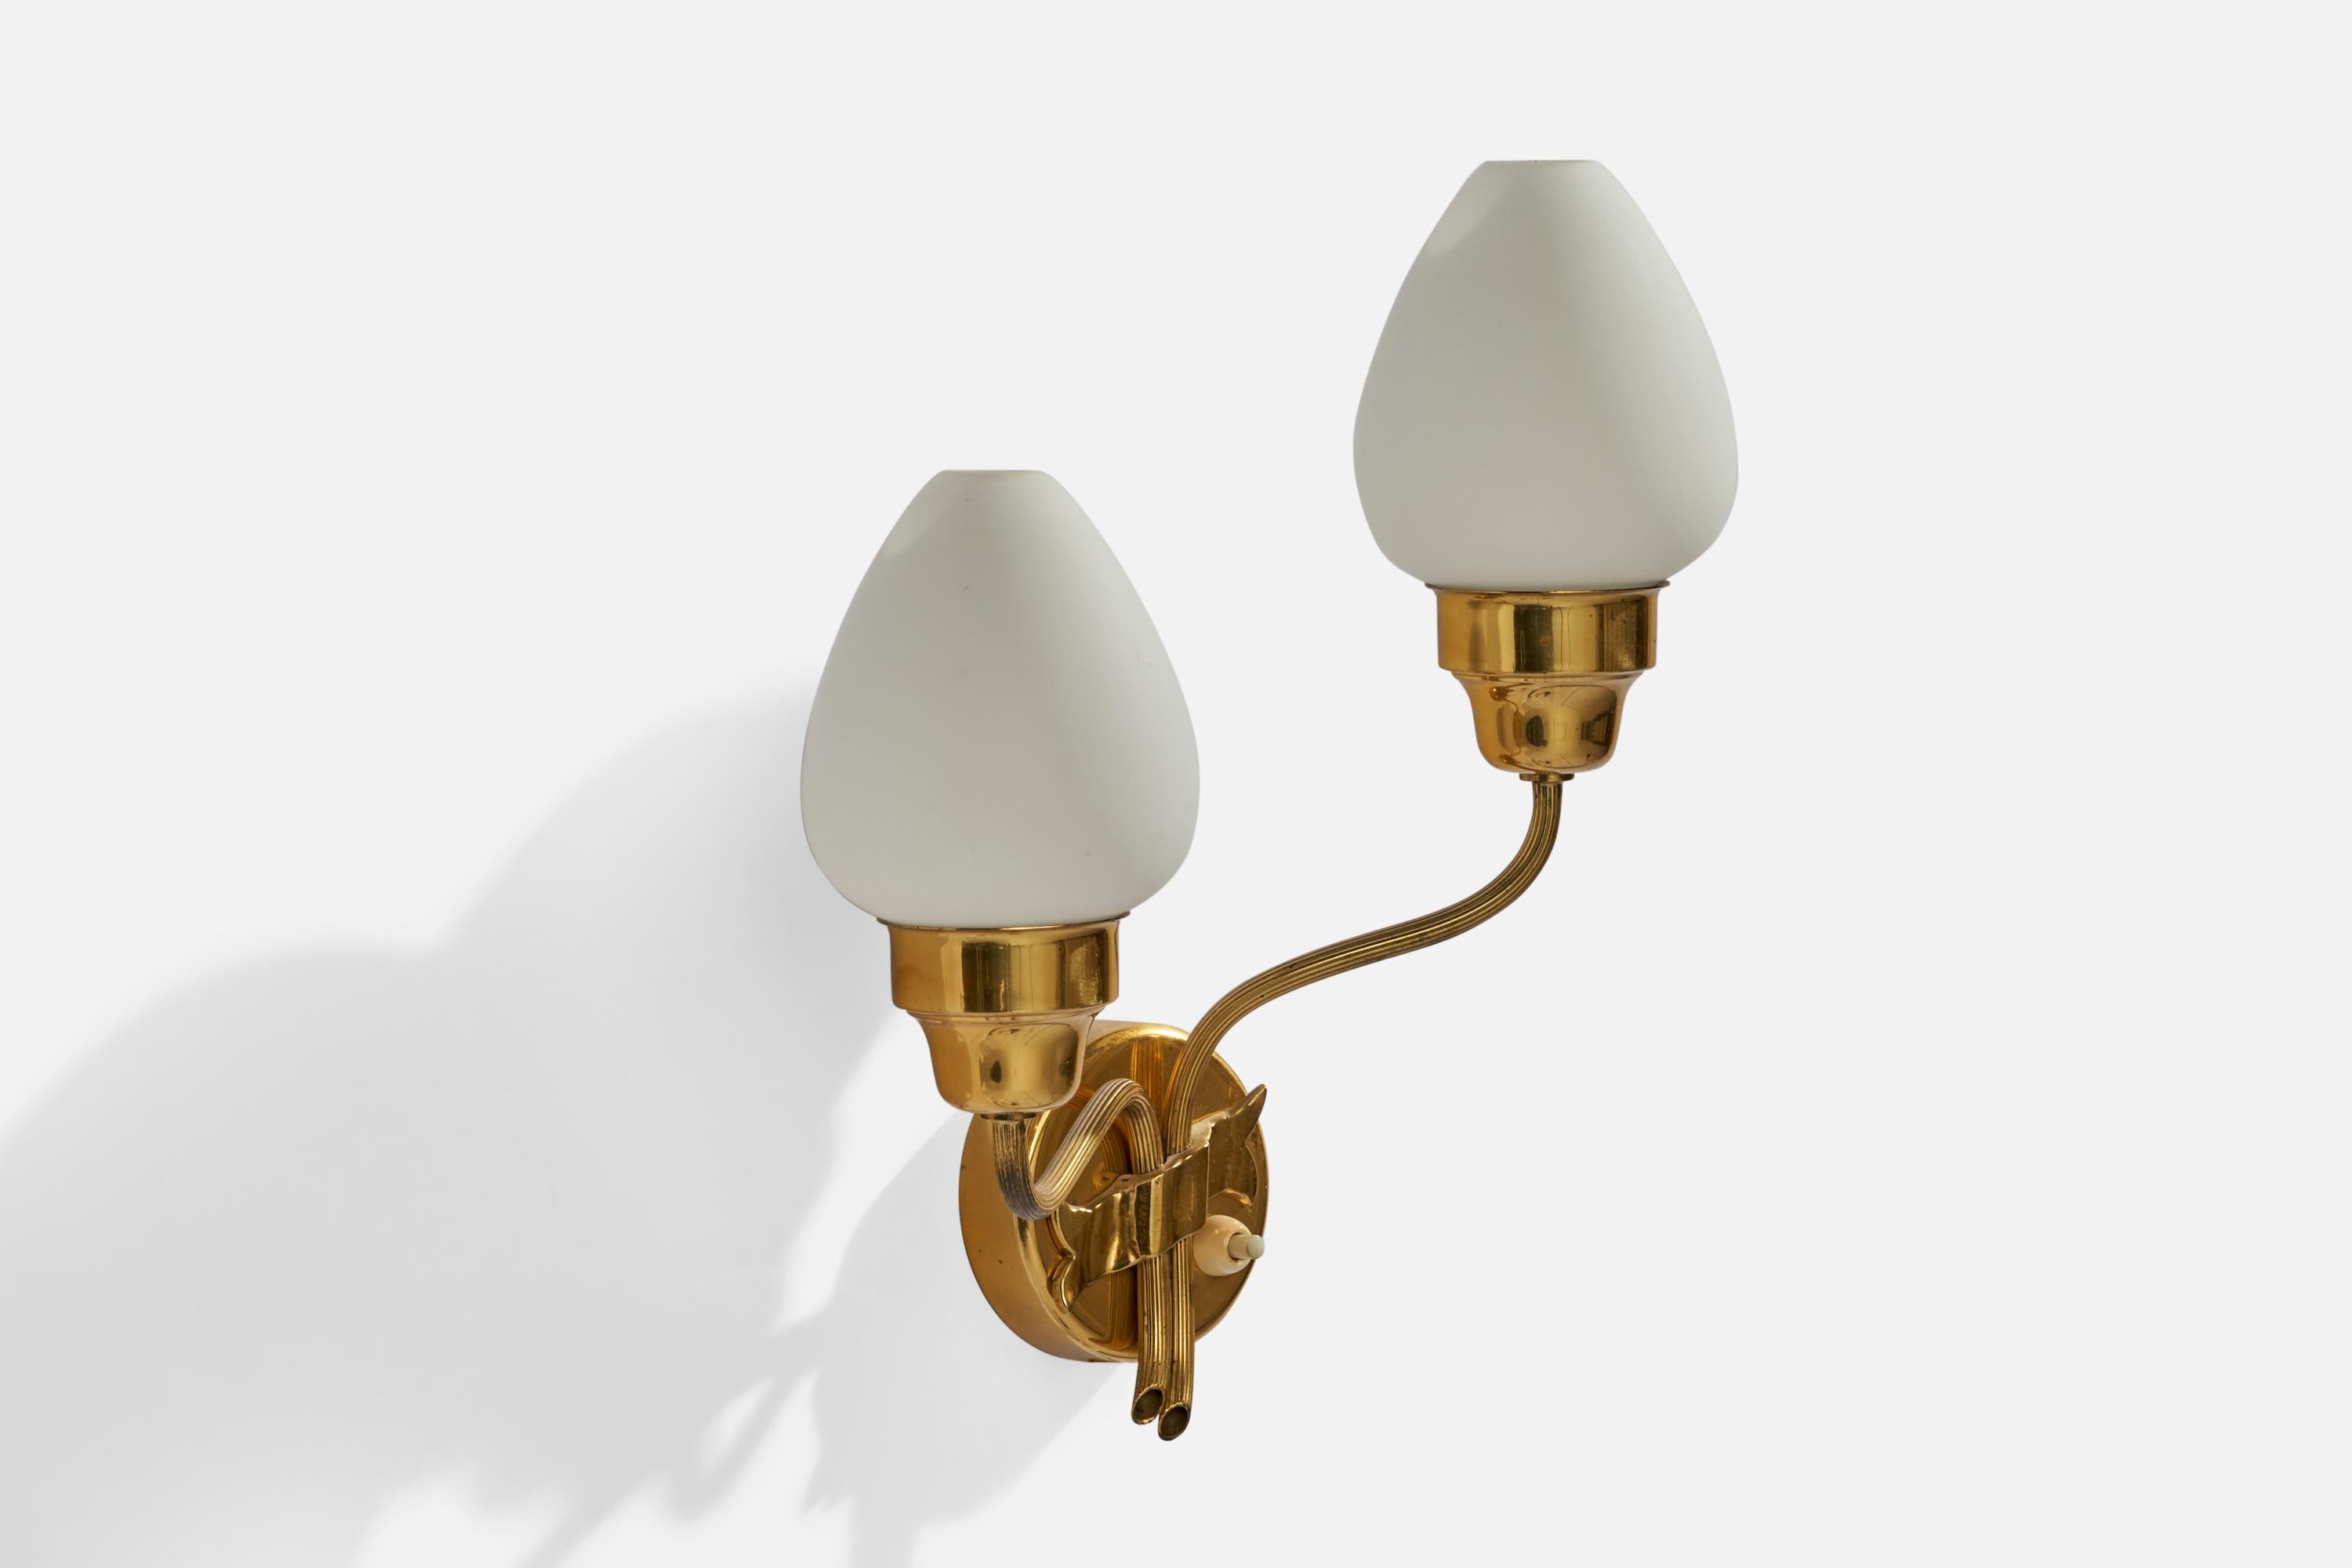 A brass and opaline glass wall light designed and produced in Sweden, c. 1940s.

Overall Dimensions (inches): 12” H x 11.5” W x 5.25” D
Back Plate Dimensions (inches): 3.5” H x 3.5” W x 1.0” D
Bulb Specifications: E-14 Bulb
Number of Sockets: 2
All